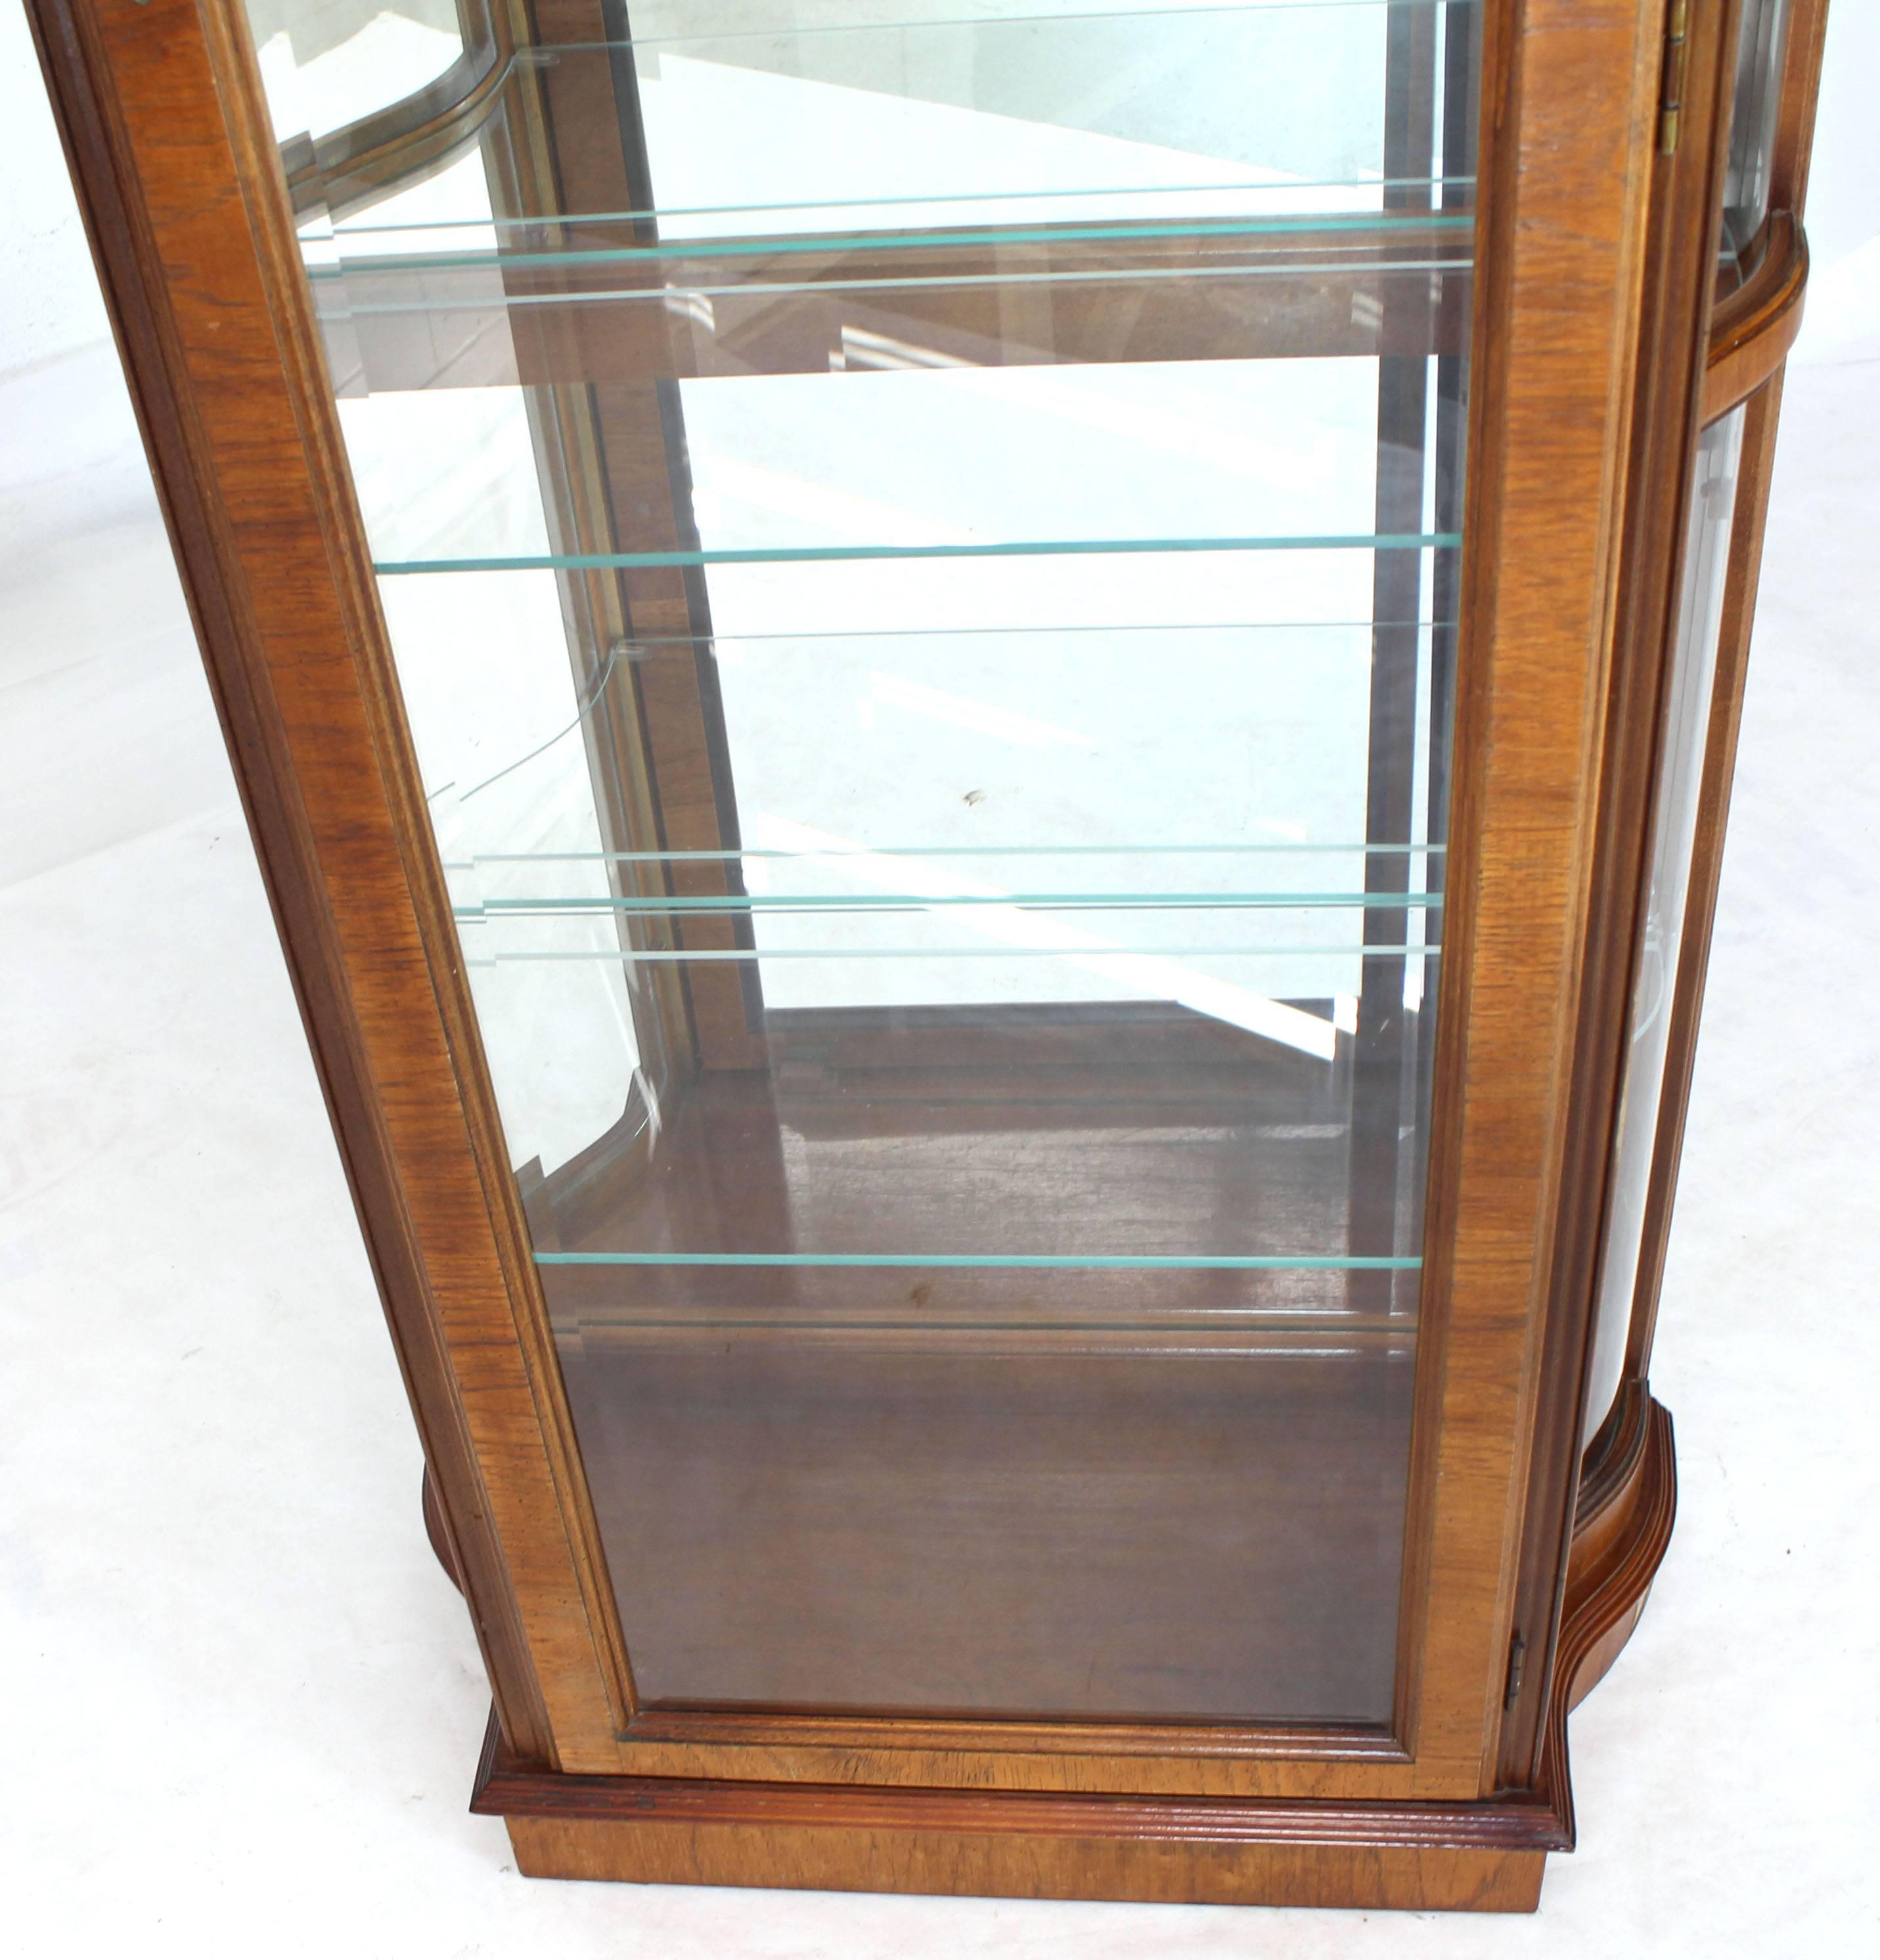 Neoclassical Tall Narrow Walnut and Mahogany Curved Glass Curio Cabinet